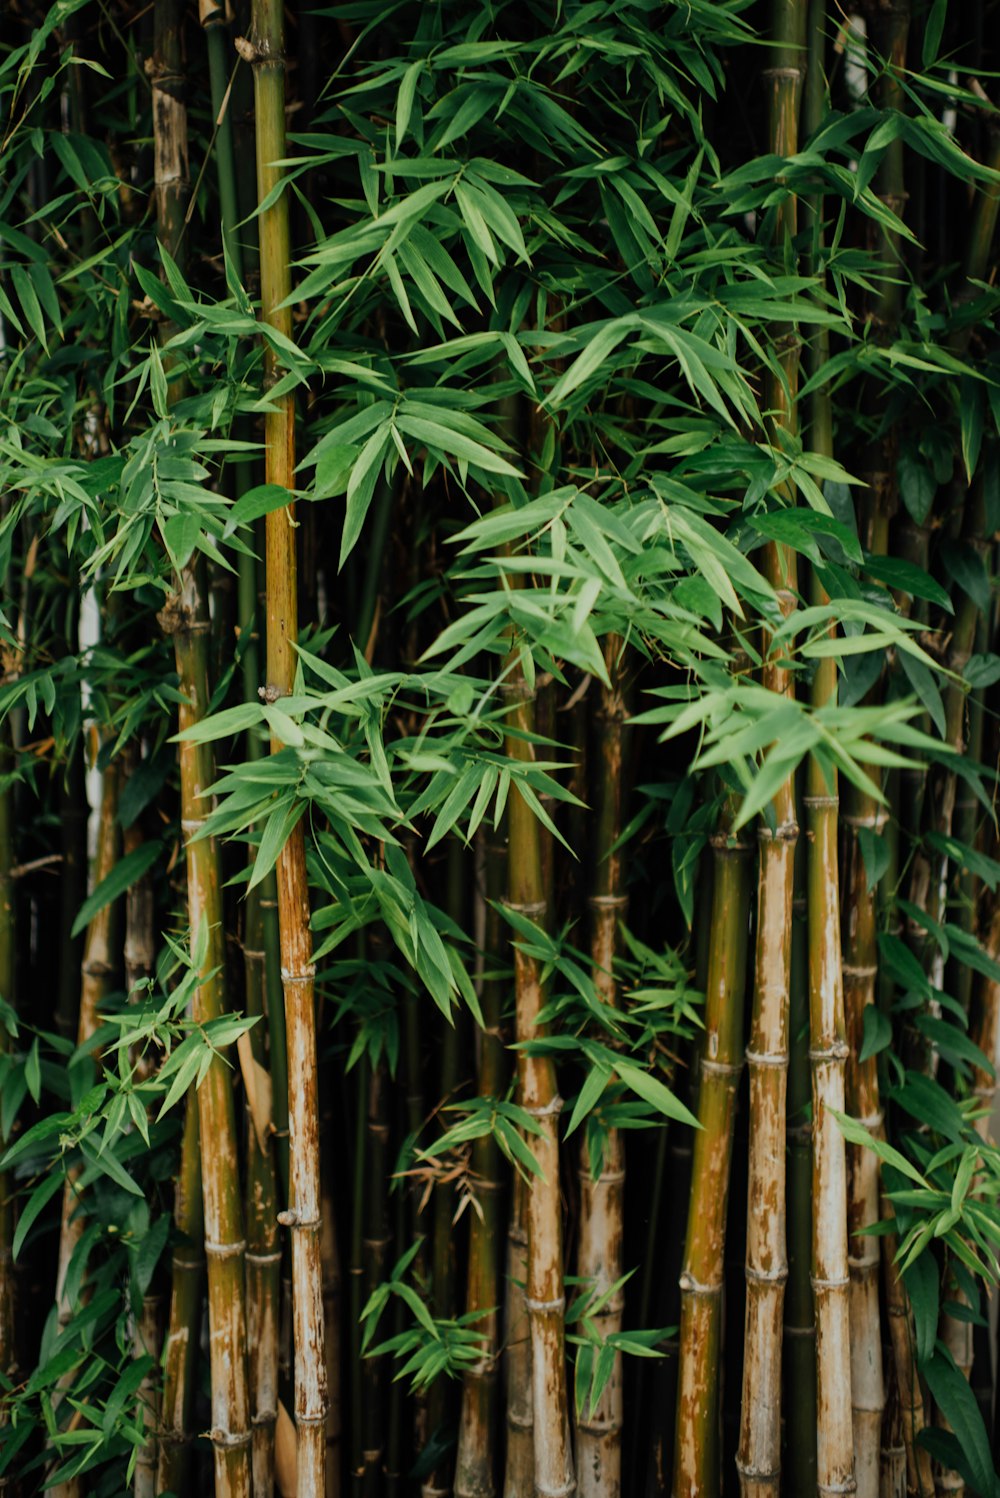 100+ Bamboo Pictures | Download Free Images & Stock Photos on Unsplash